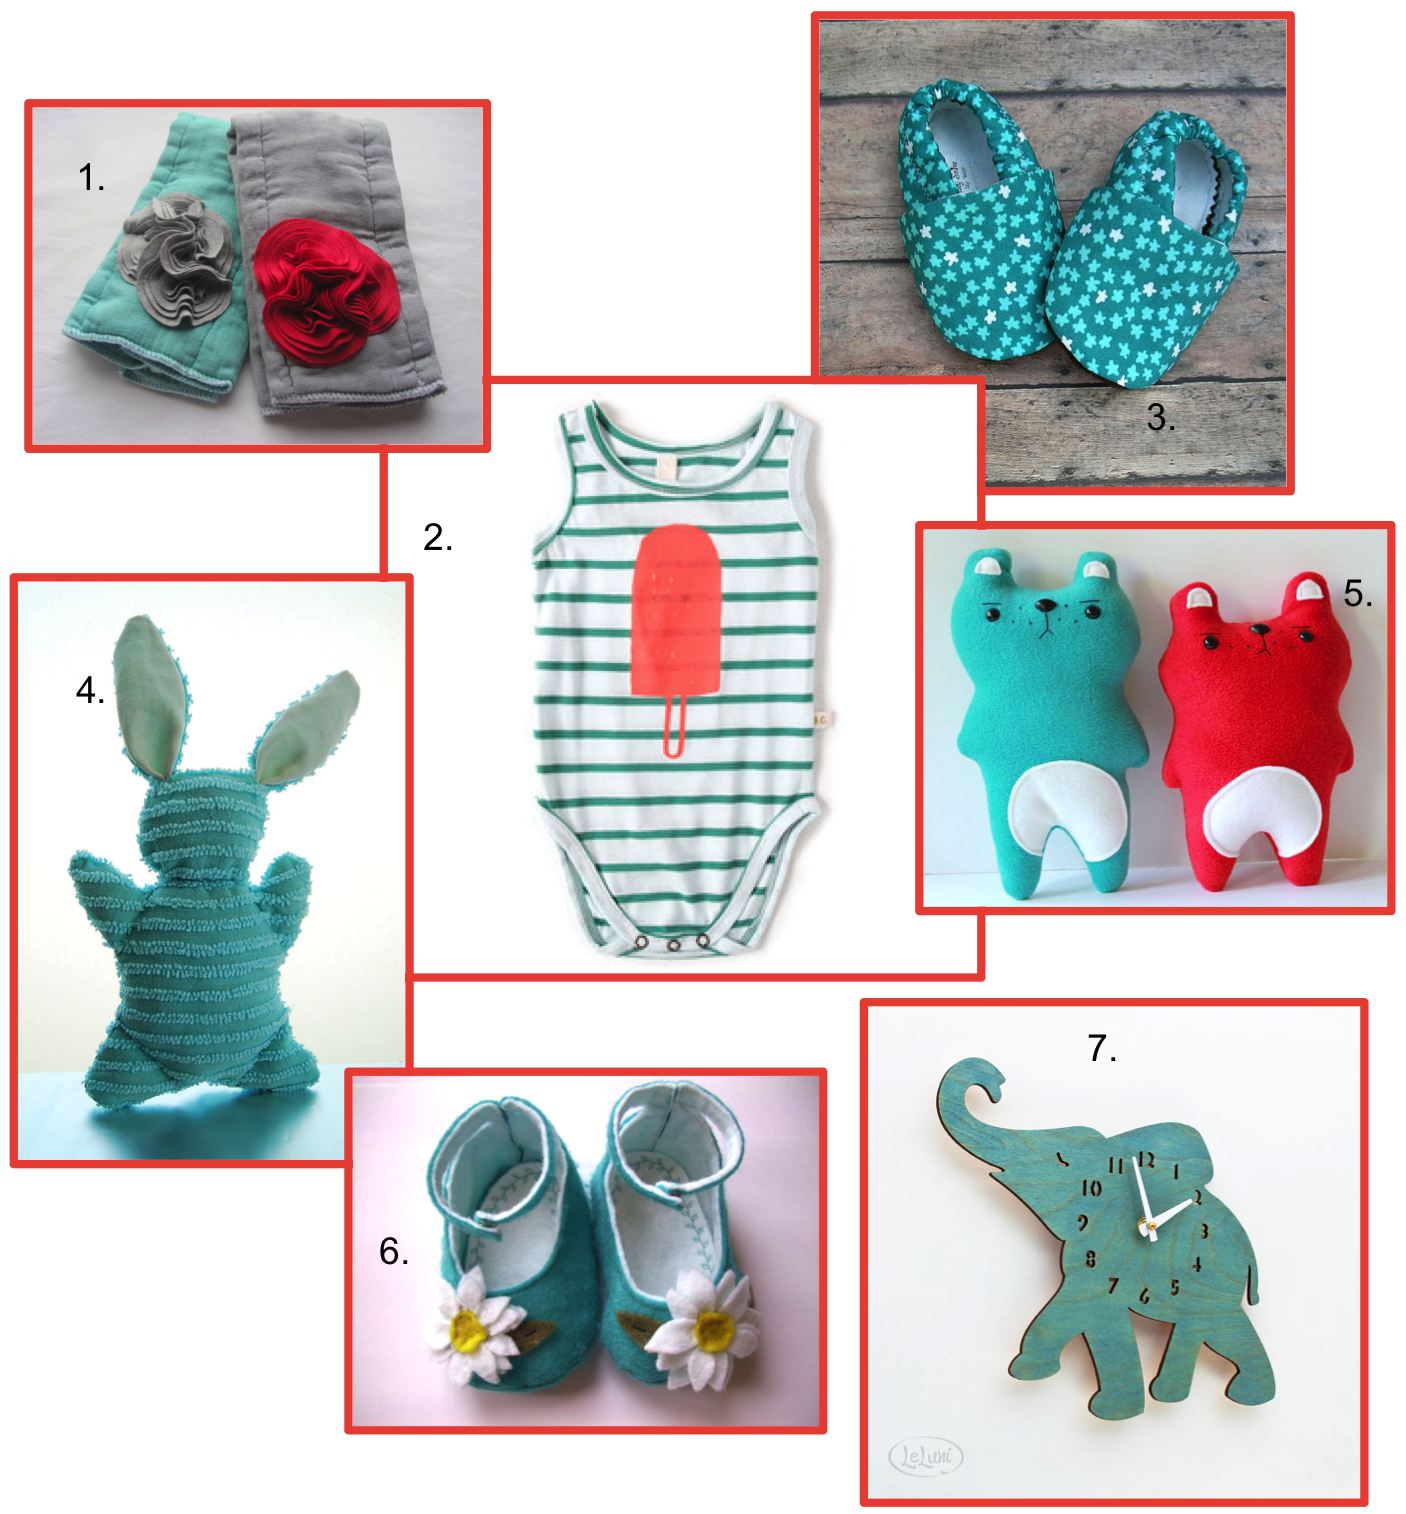 shopping for baby} you teal my breath away : This Little street